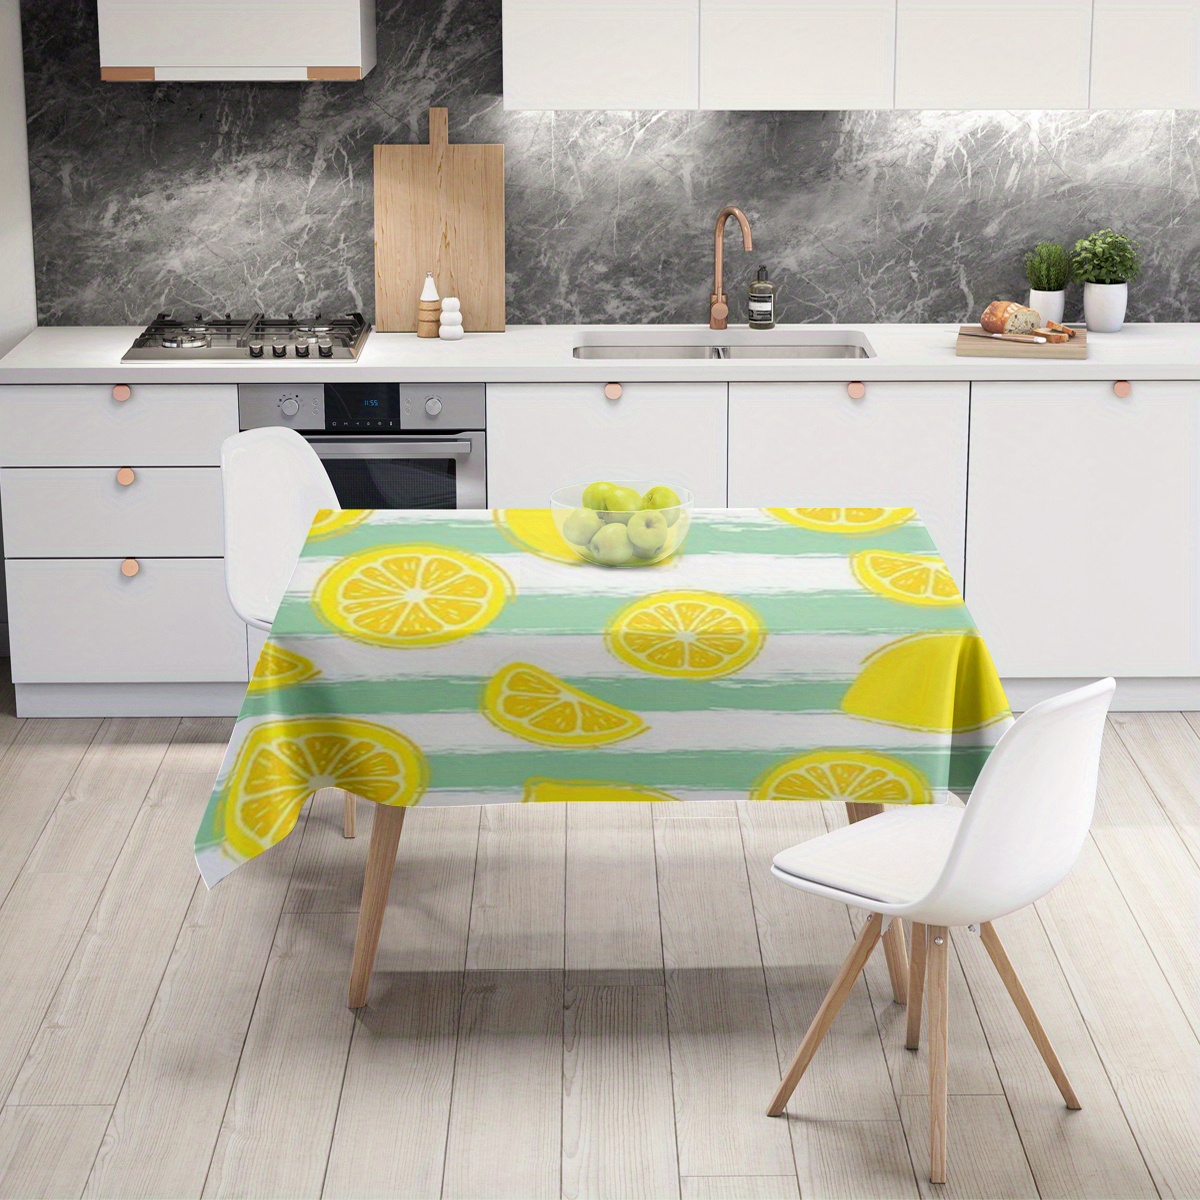 

Jit 1pc Tropical Lemon Print Summer Tablecloth - Polyester Machine Made, Heat-resistant Table Cover For Pool Parties, Beach, Picnics, Fresh Stripe Design, Perfect For Outdoor And Indoor Use